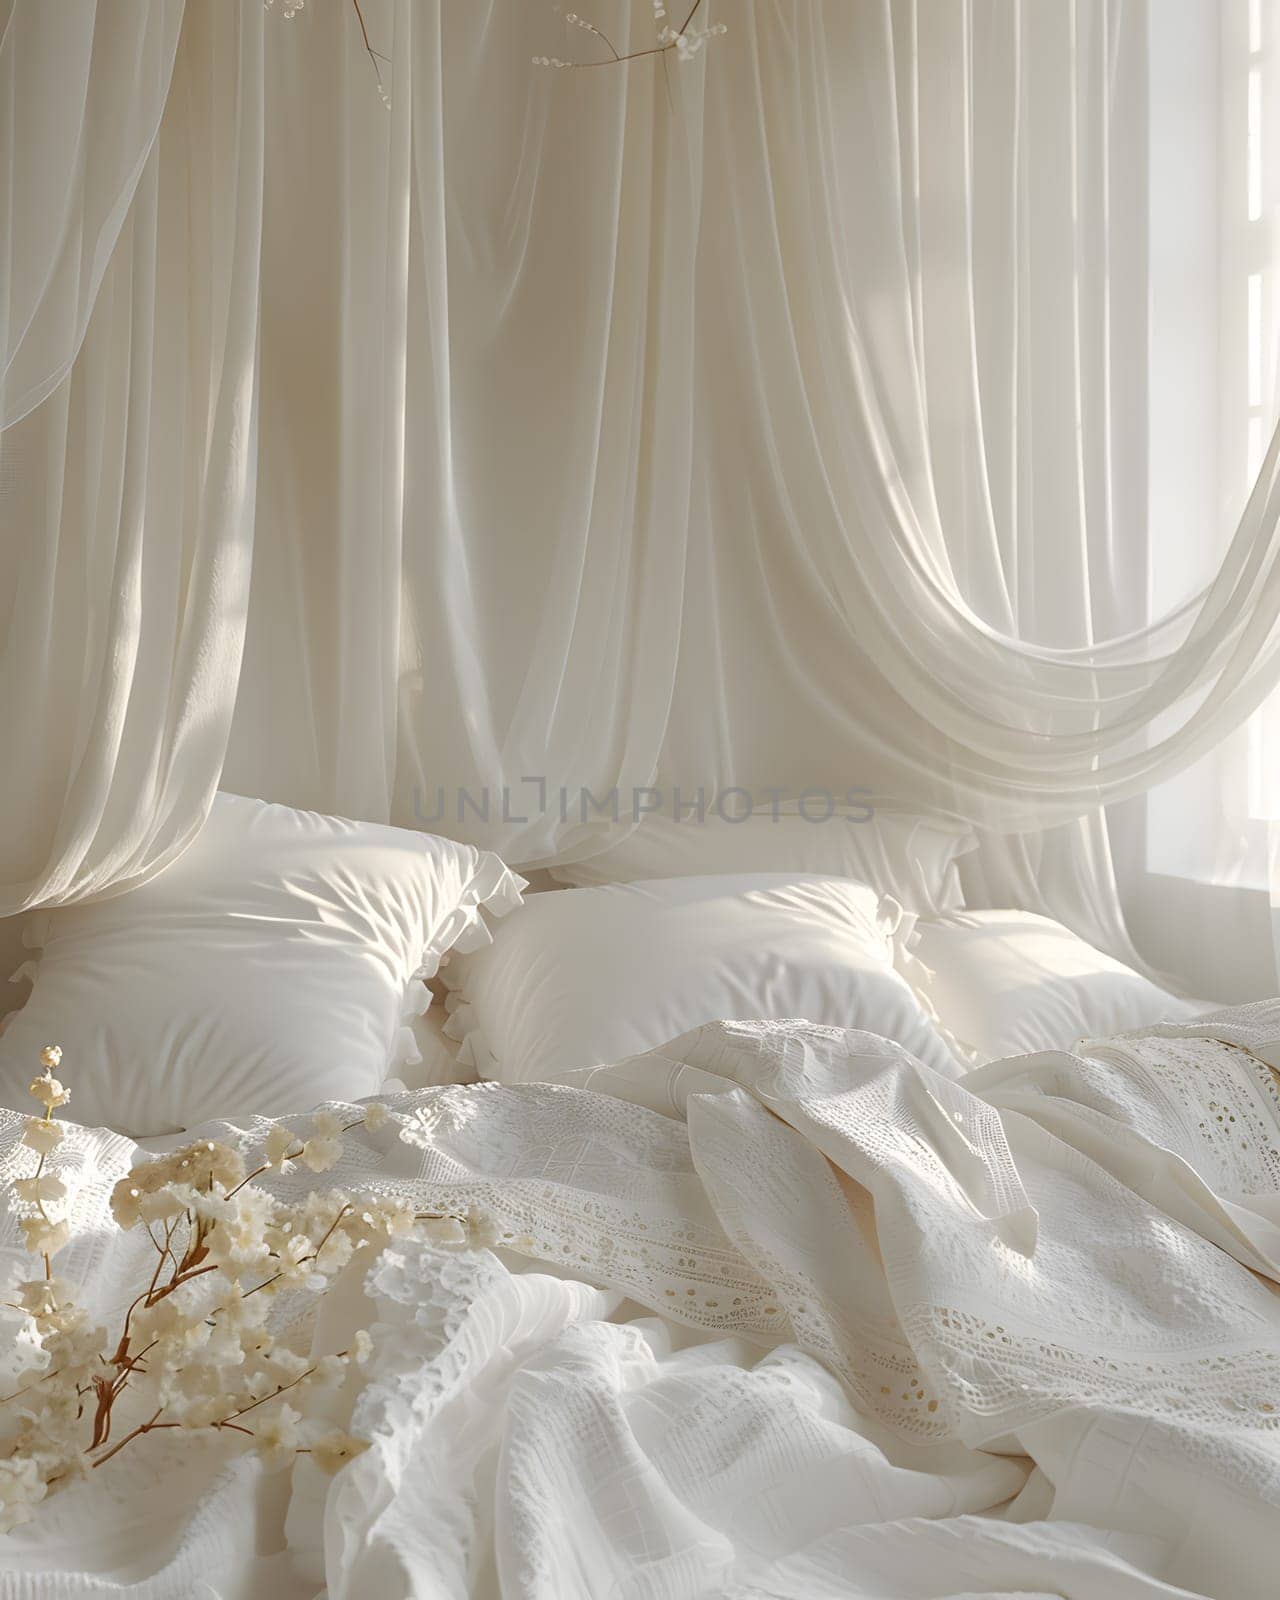 A canopy bed adorned with white linens, pillows, and petals under a sheer curtain. The wooden frame creates a romantic bridal accessory for any event